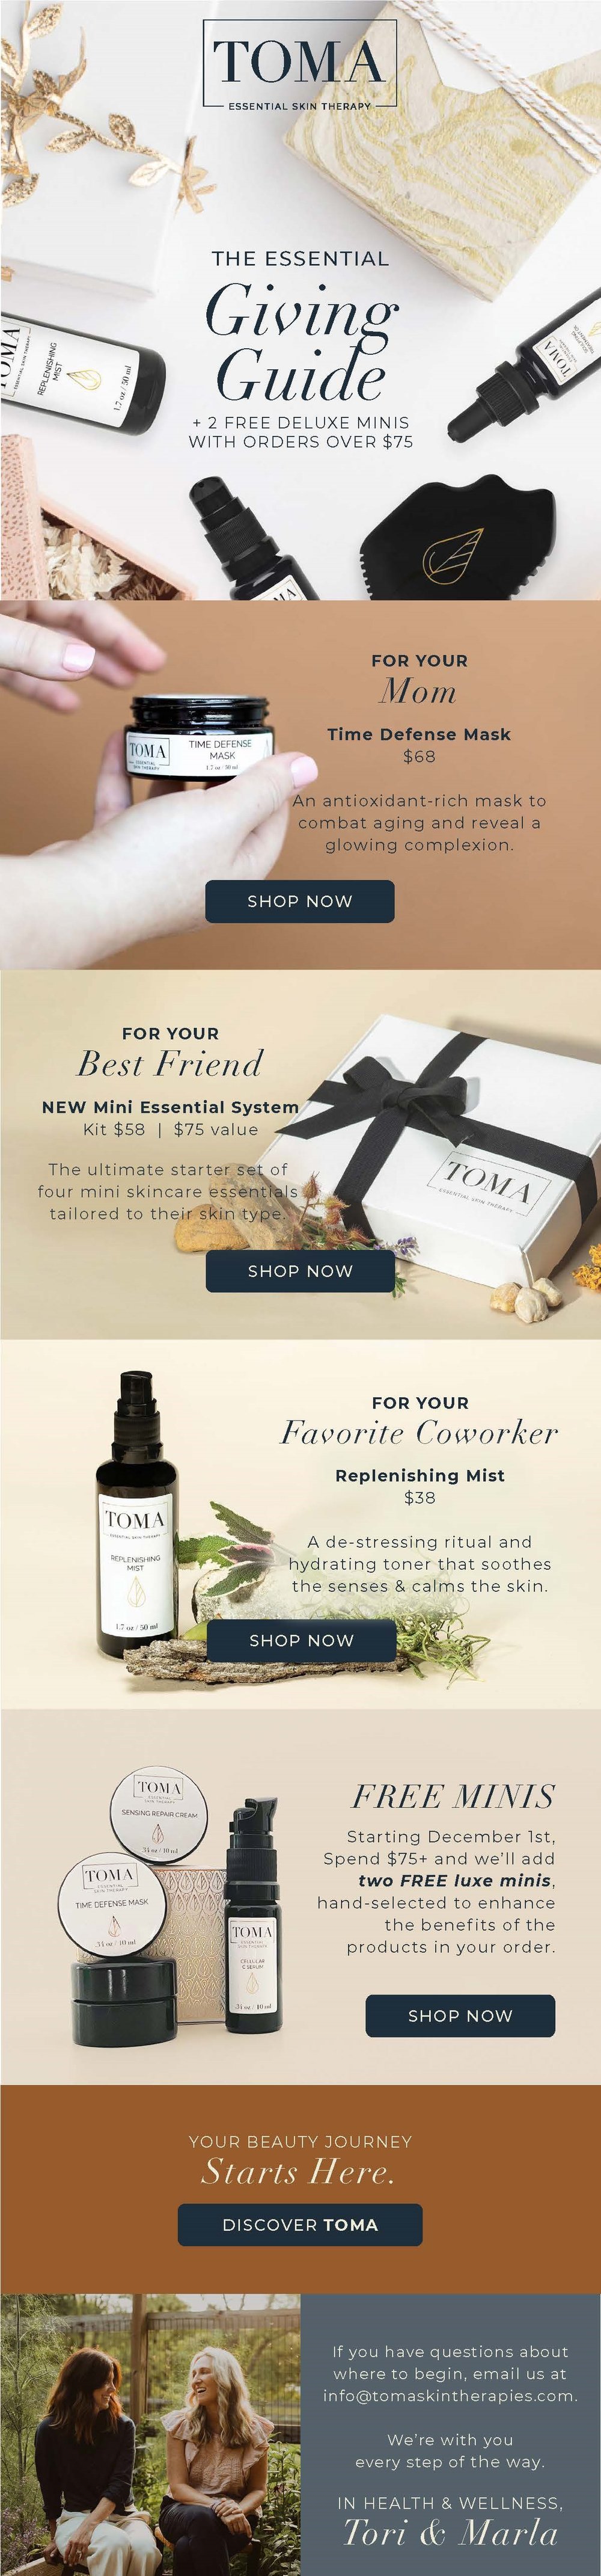 Toma Skin Therapies Email - Holiday 2 Gifting Options.jpg